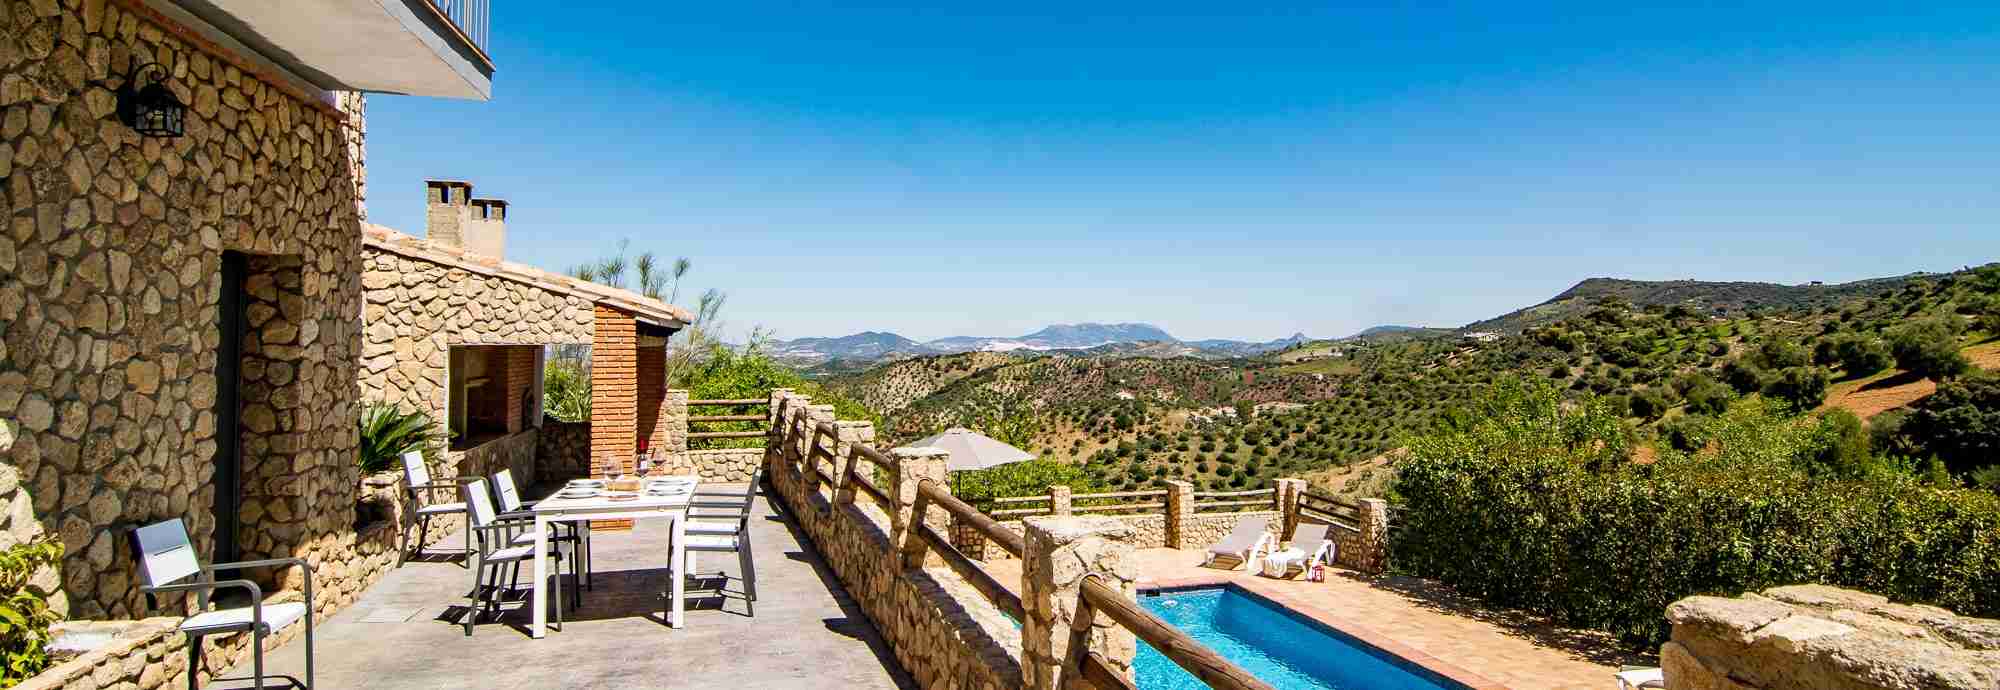 Luxury Ronda mountain villa perched on the edge of a natural park